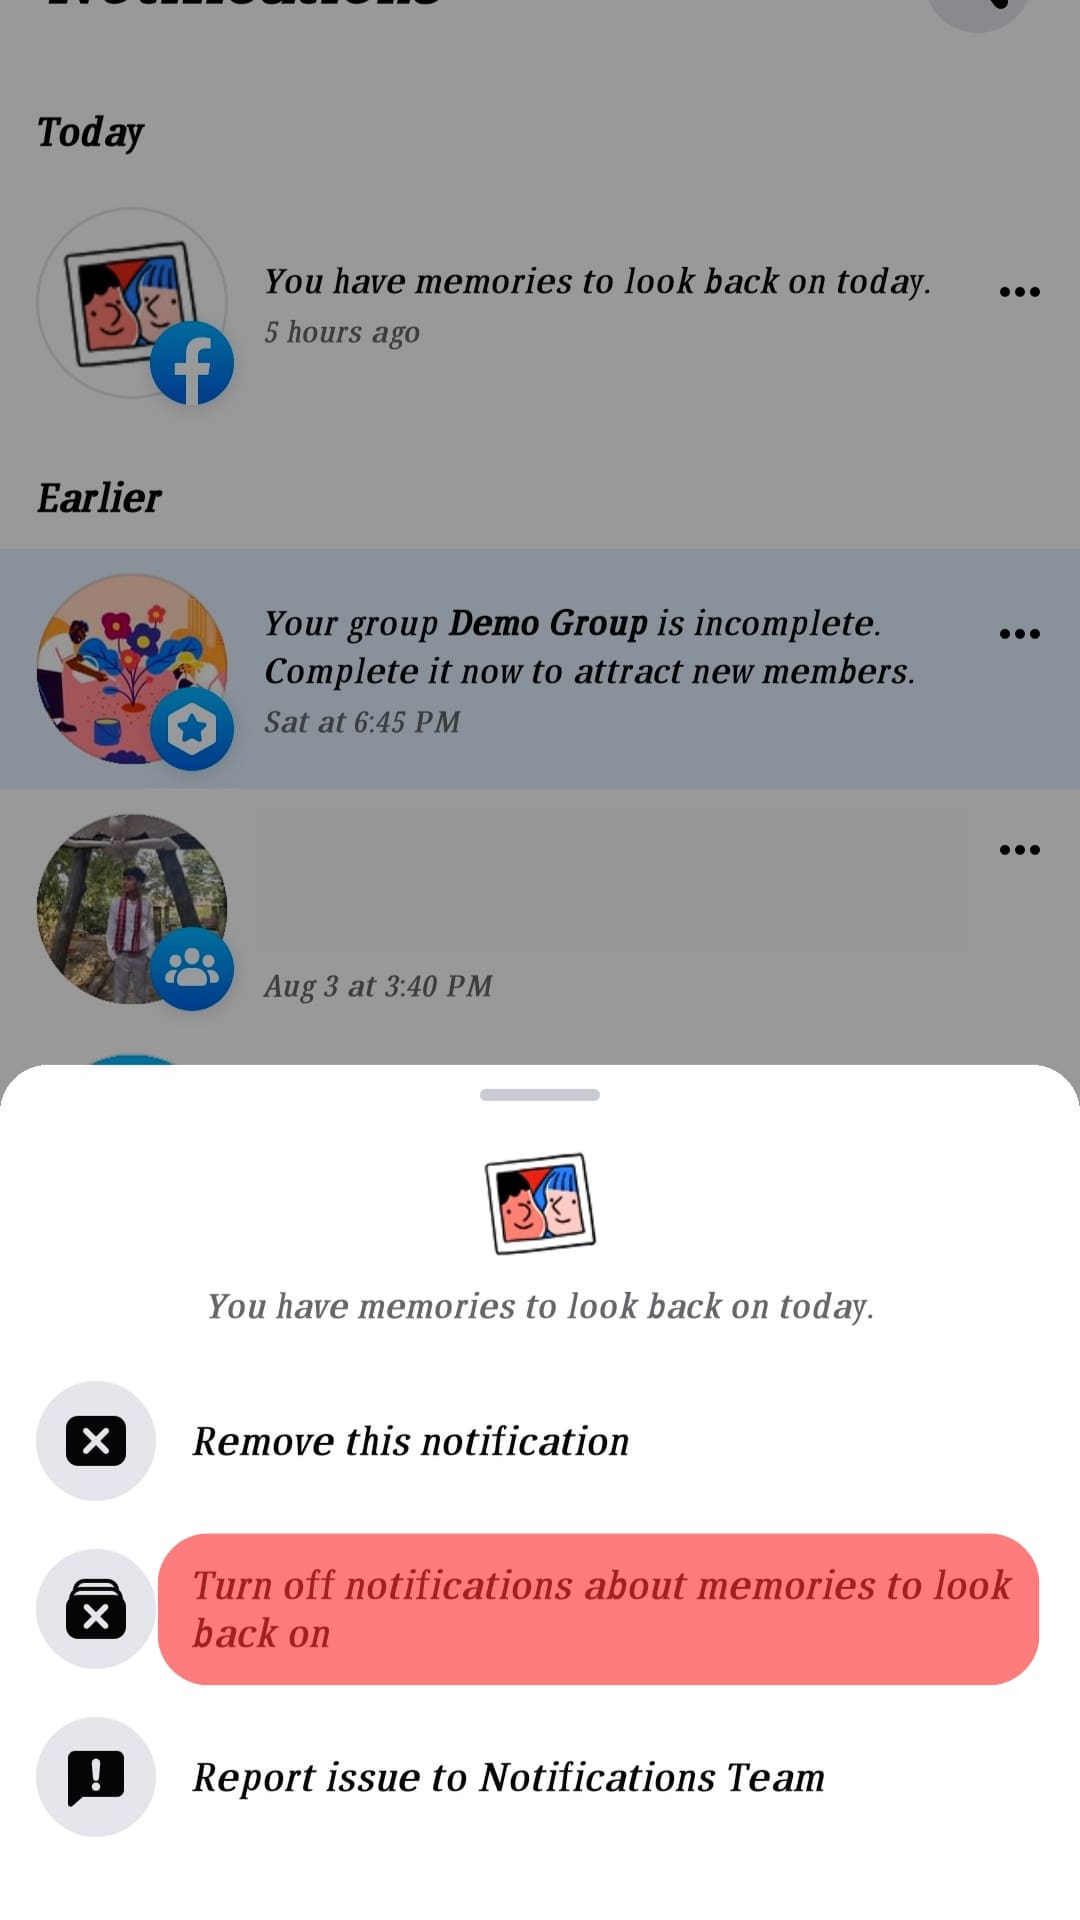 Select Turn Off Notifications